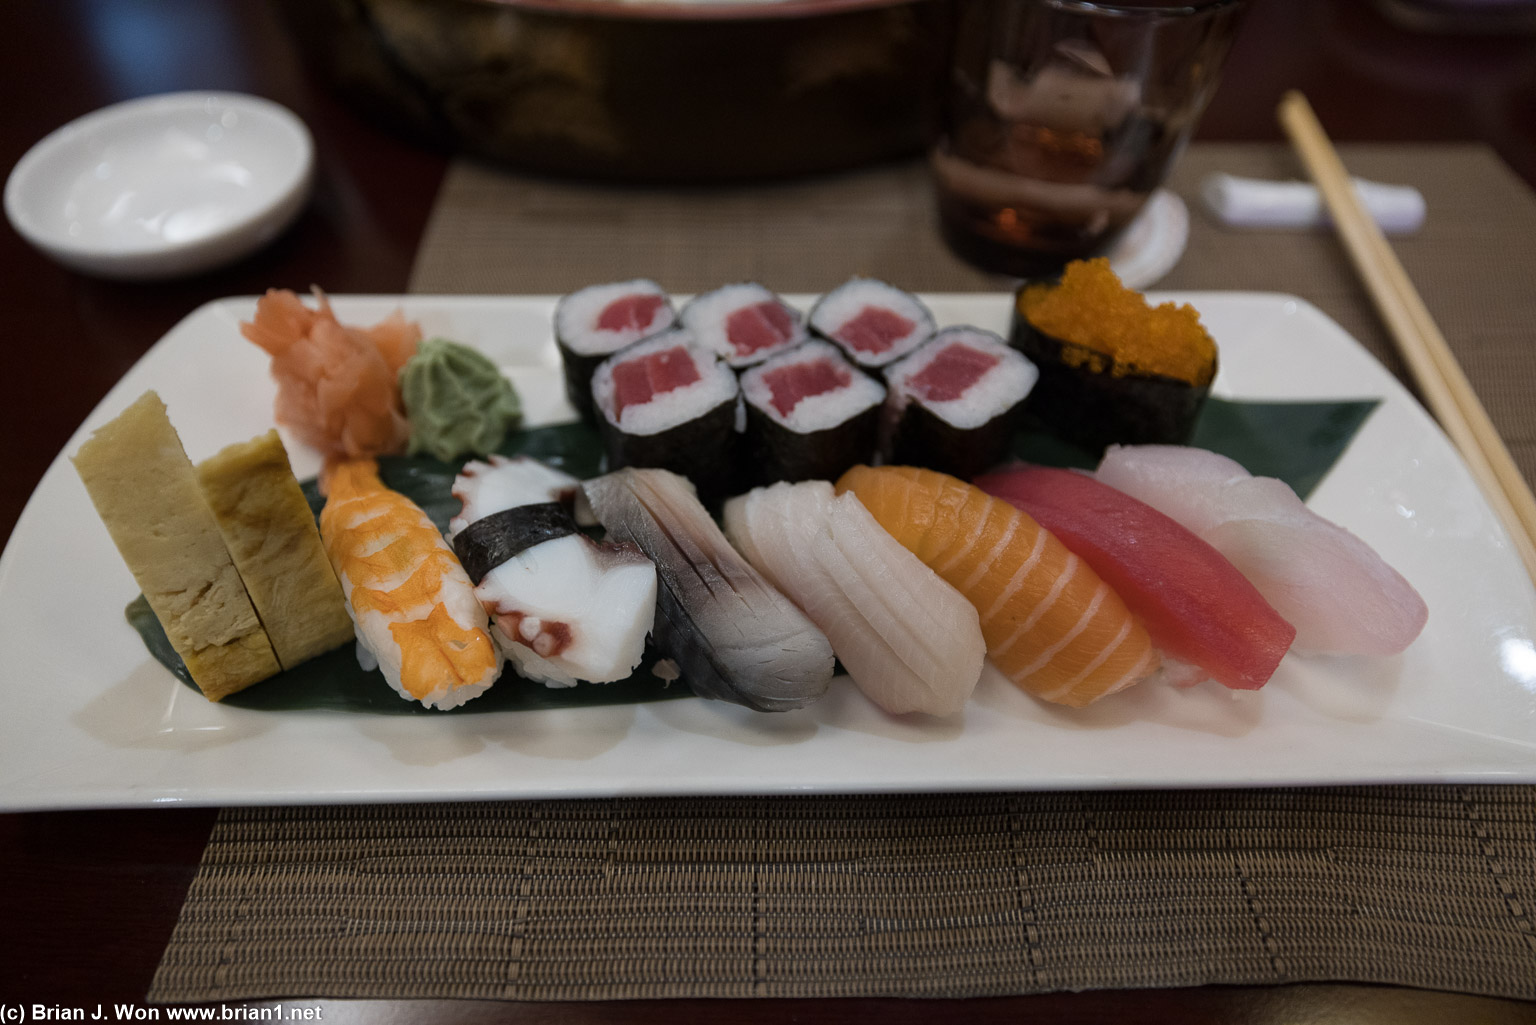 Assorted sushi was decent enough but the quality of the rice was disappointing.